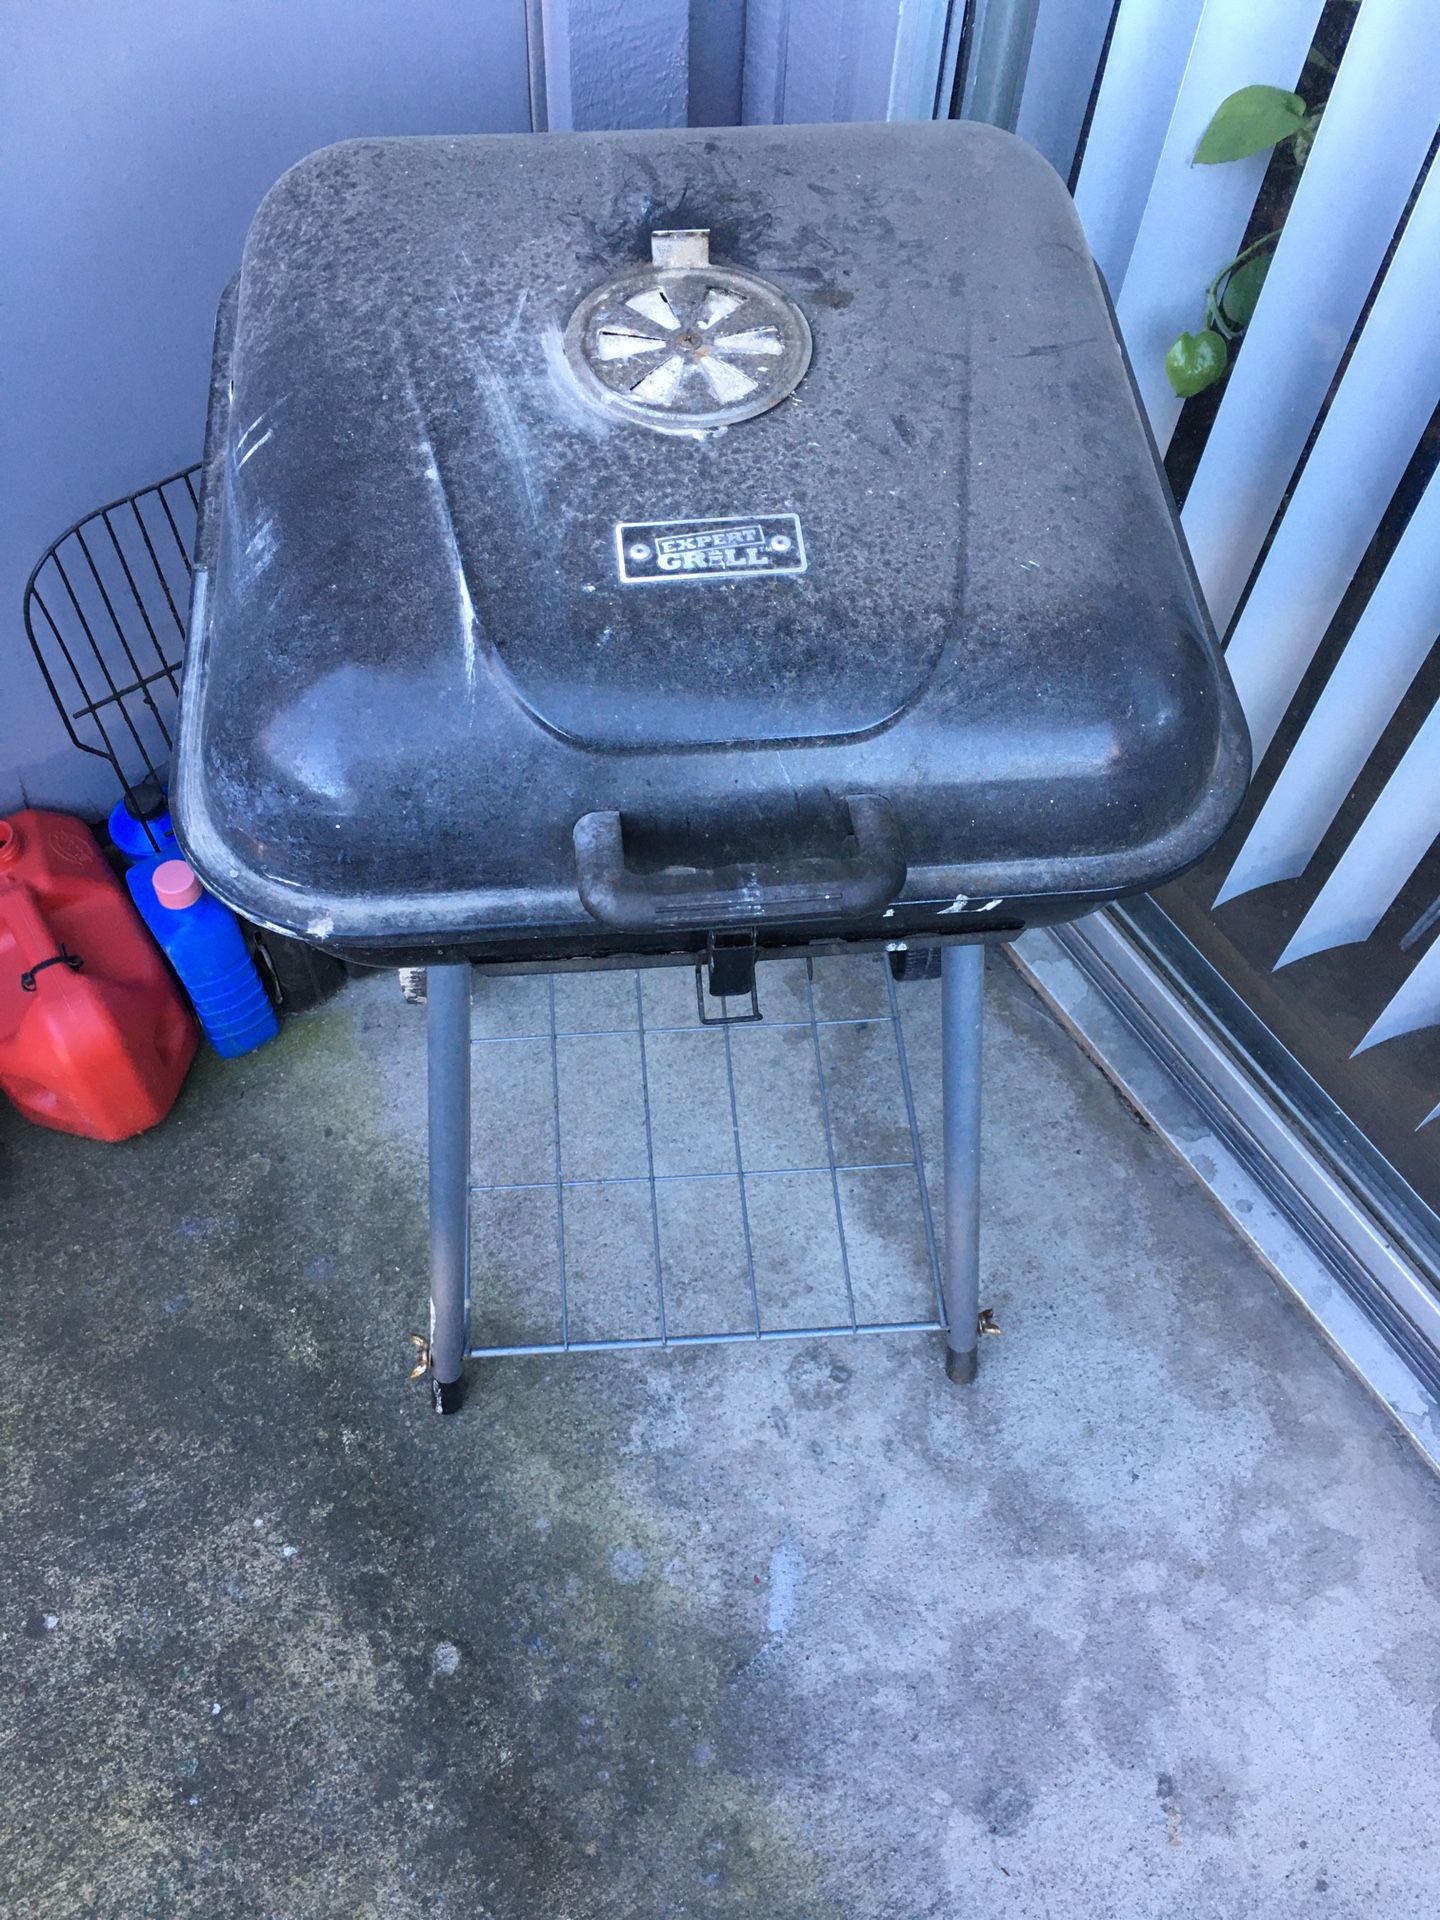 Outside BBQ grill